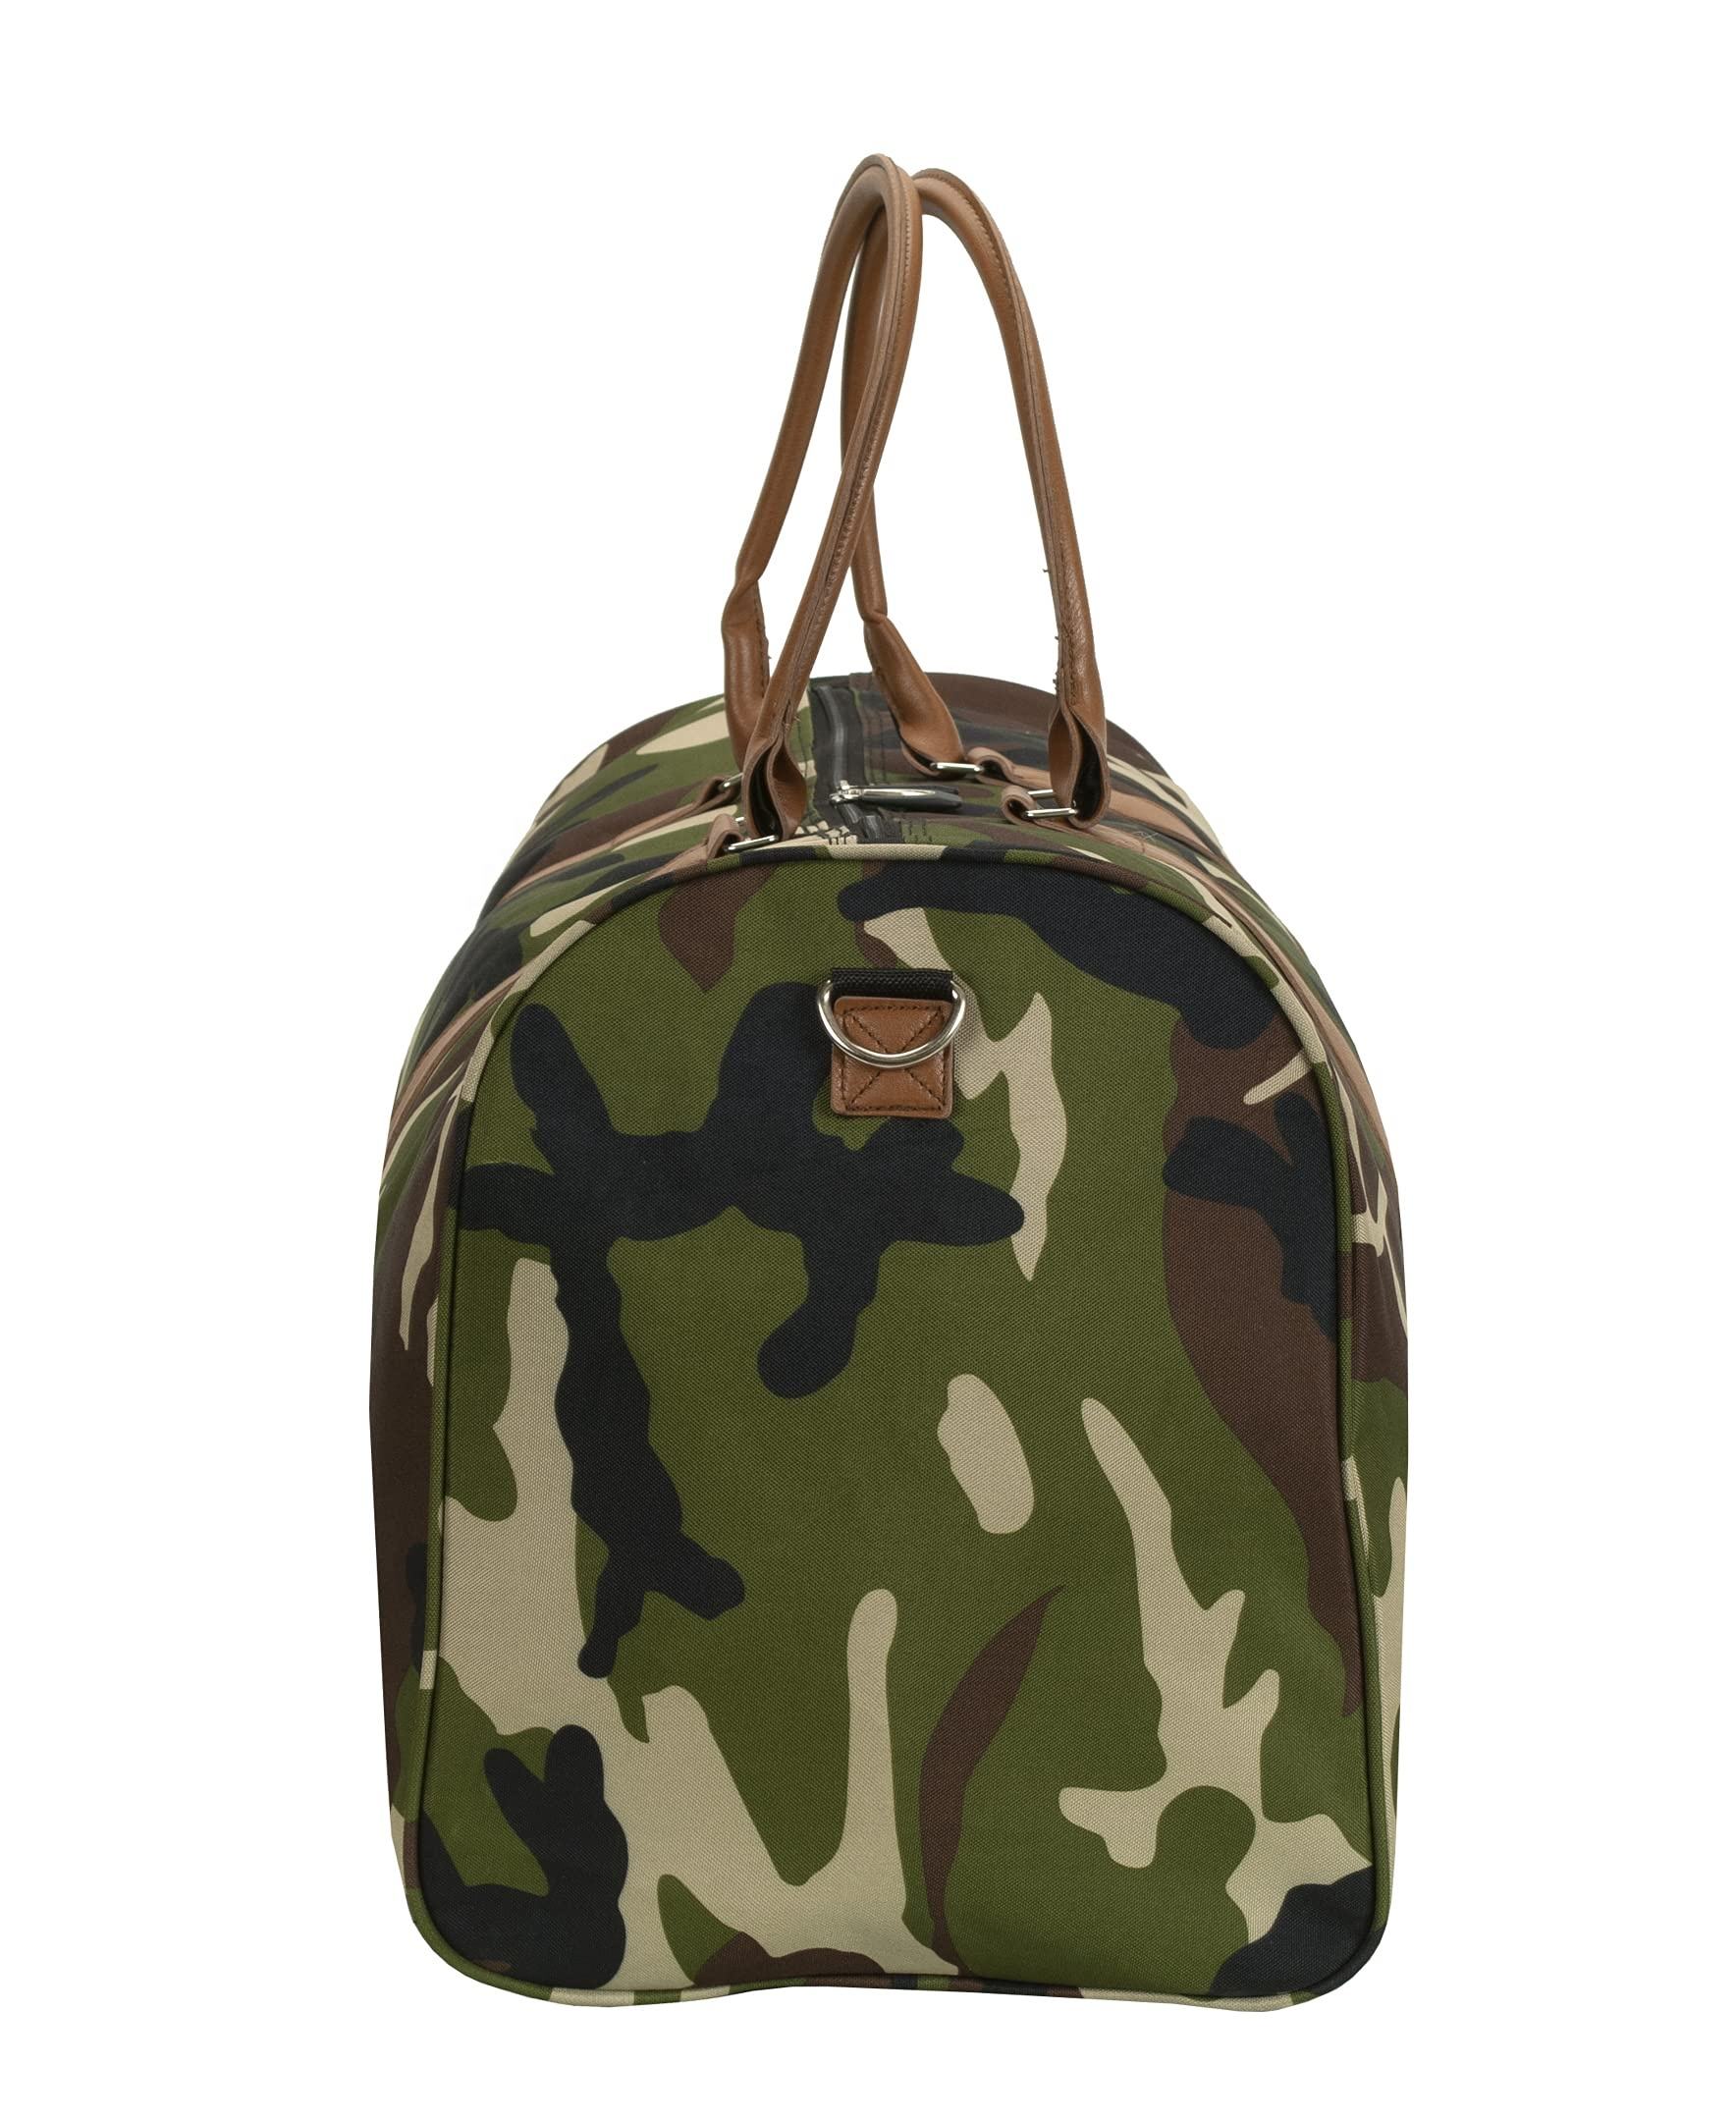 Promotion Portable Camouflage Custom Logo Gym Sports Yoga Tote Duffle Bag mit Schuhfach Outdoor Sports Side Bag